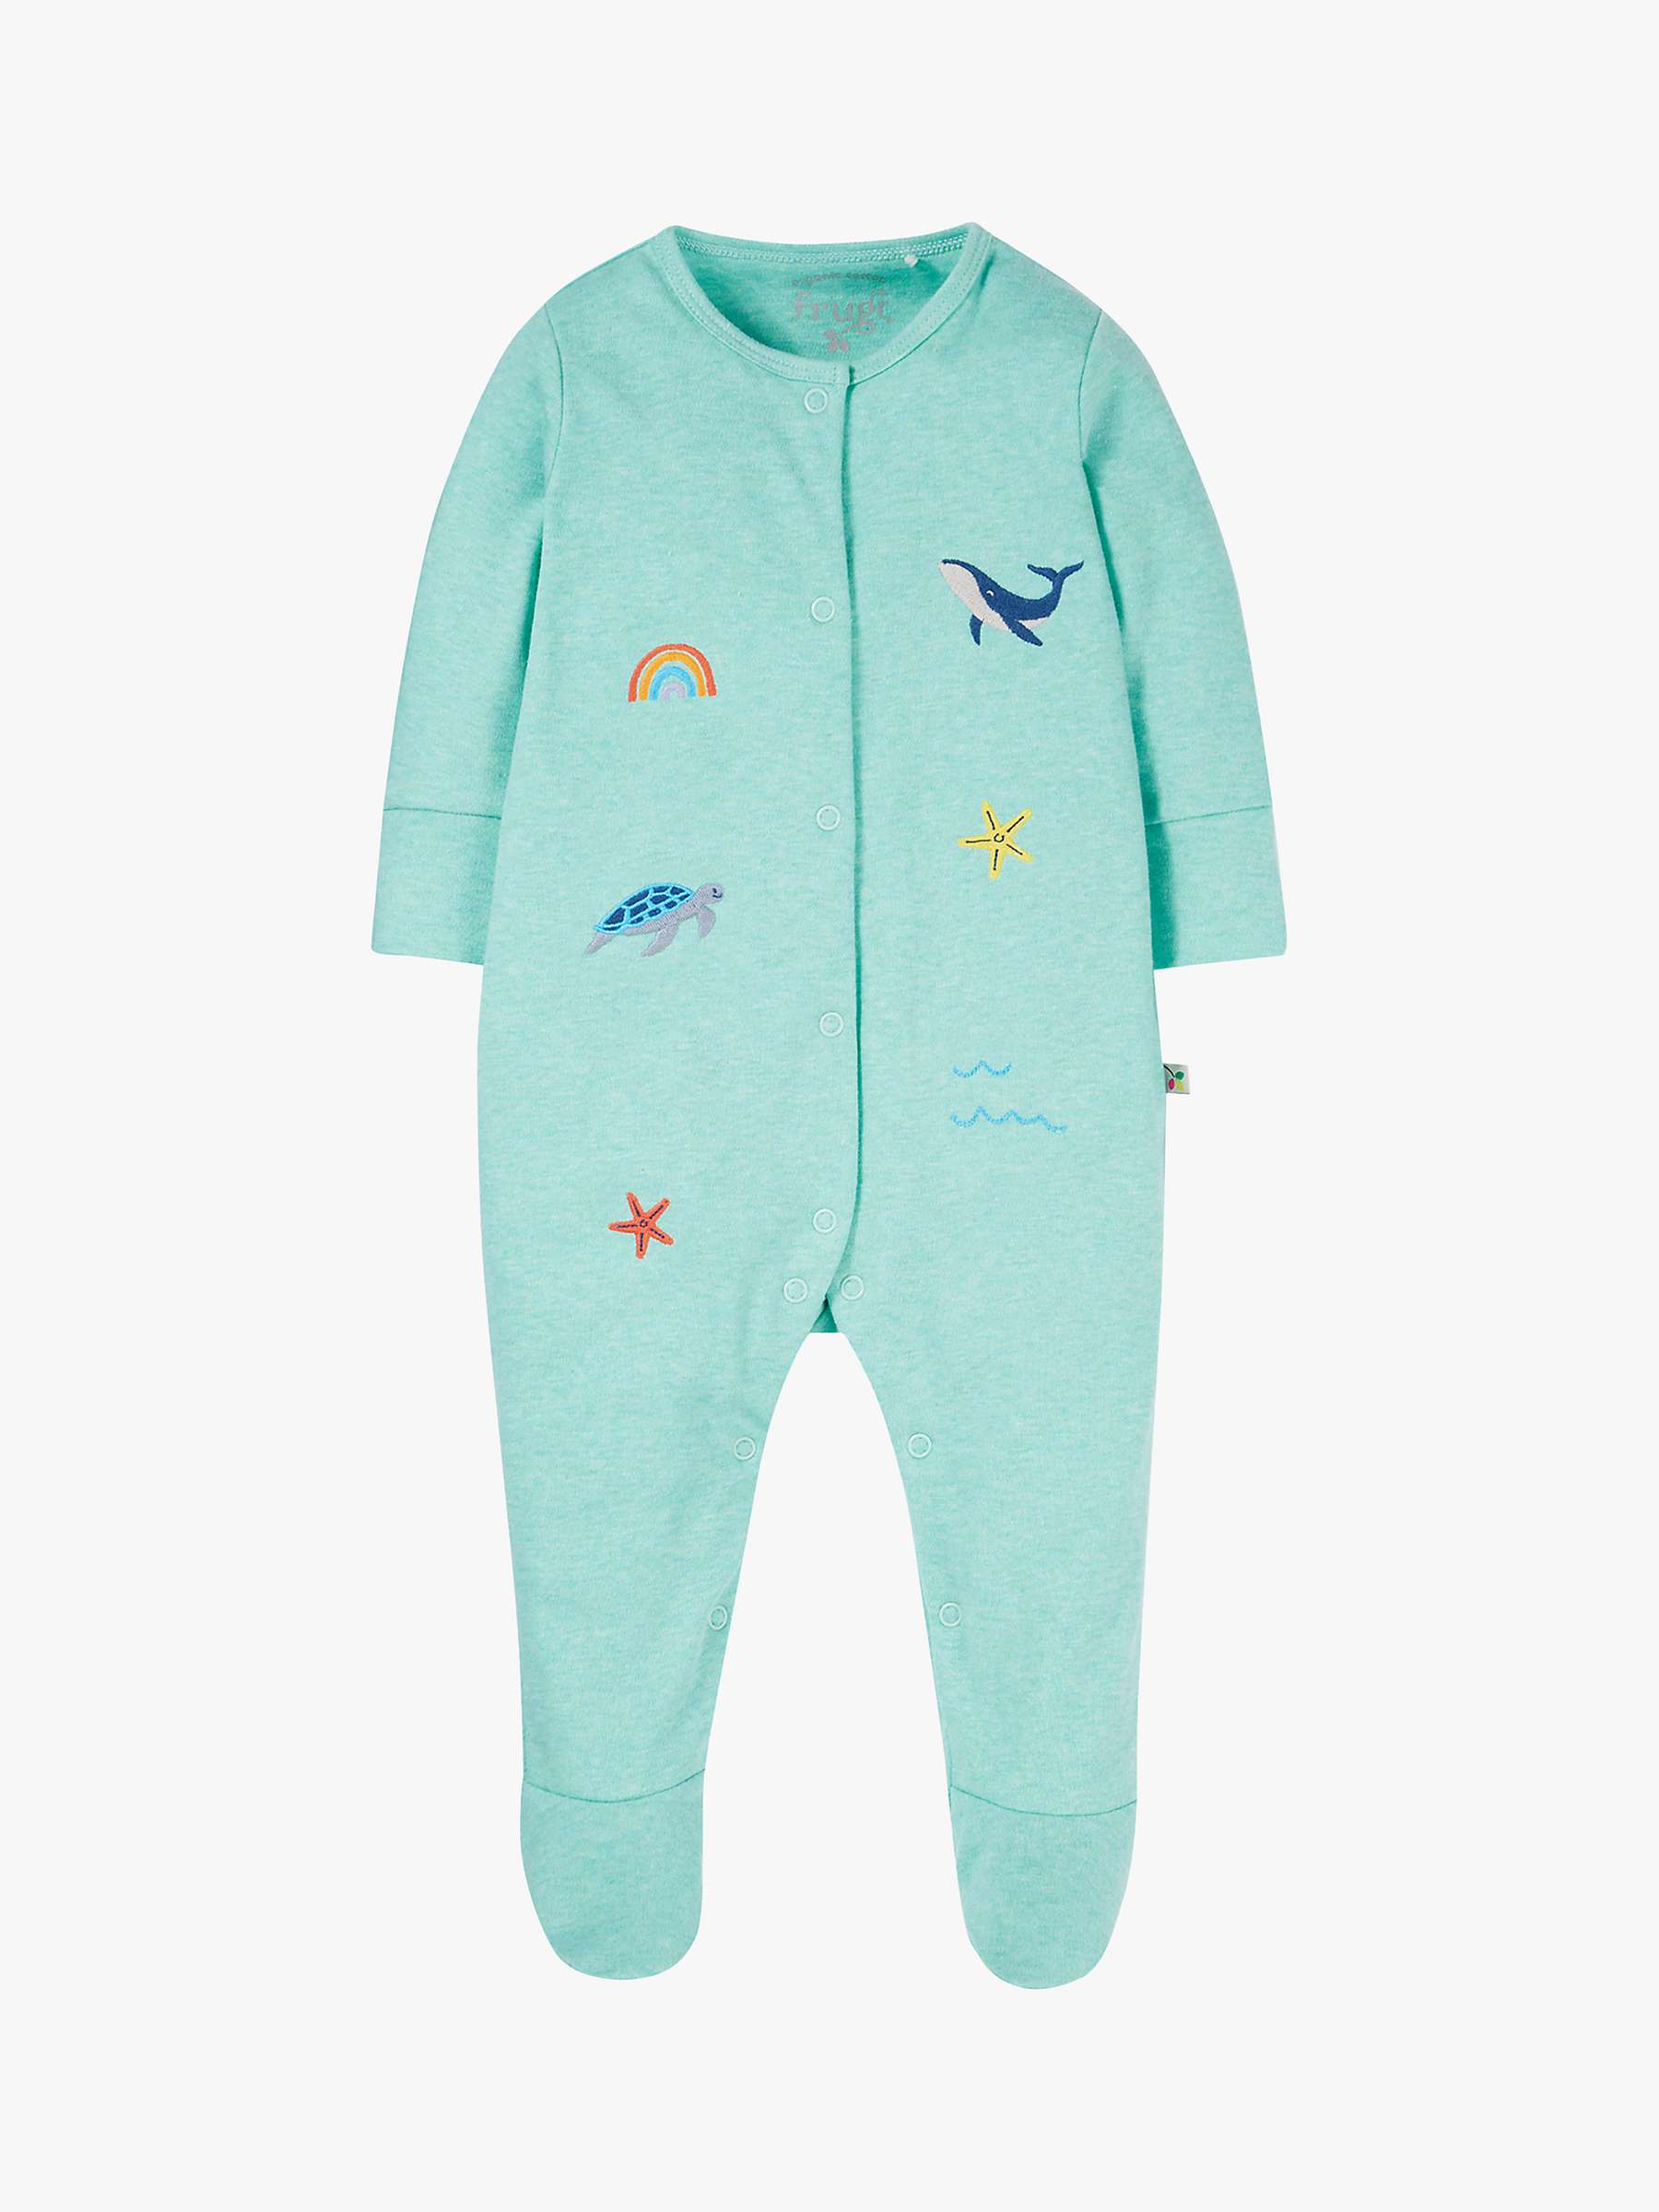 Buy Frugi Baby Organic Cotton Lovely Embroidered Babygrow, Mint Marl/Rainbow Sea Online at johnlewis.com